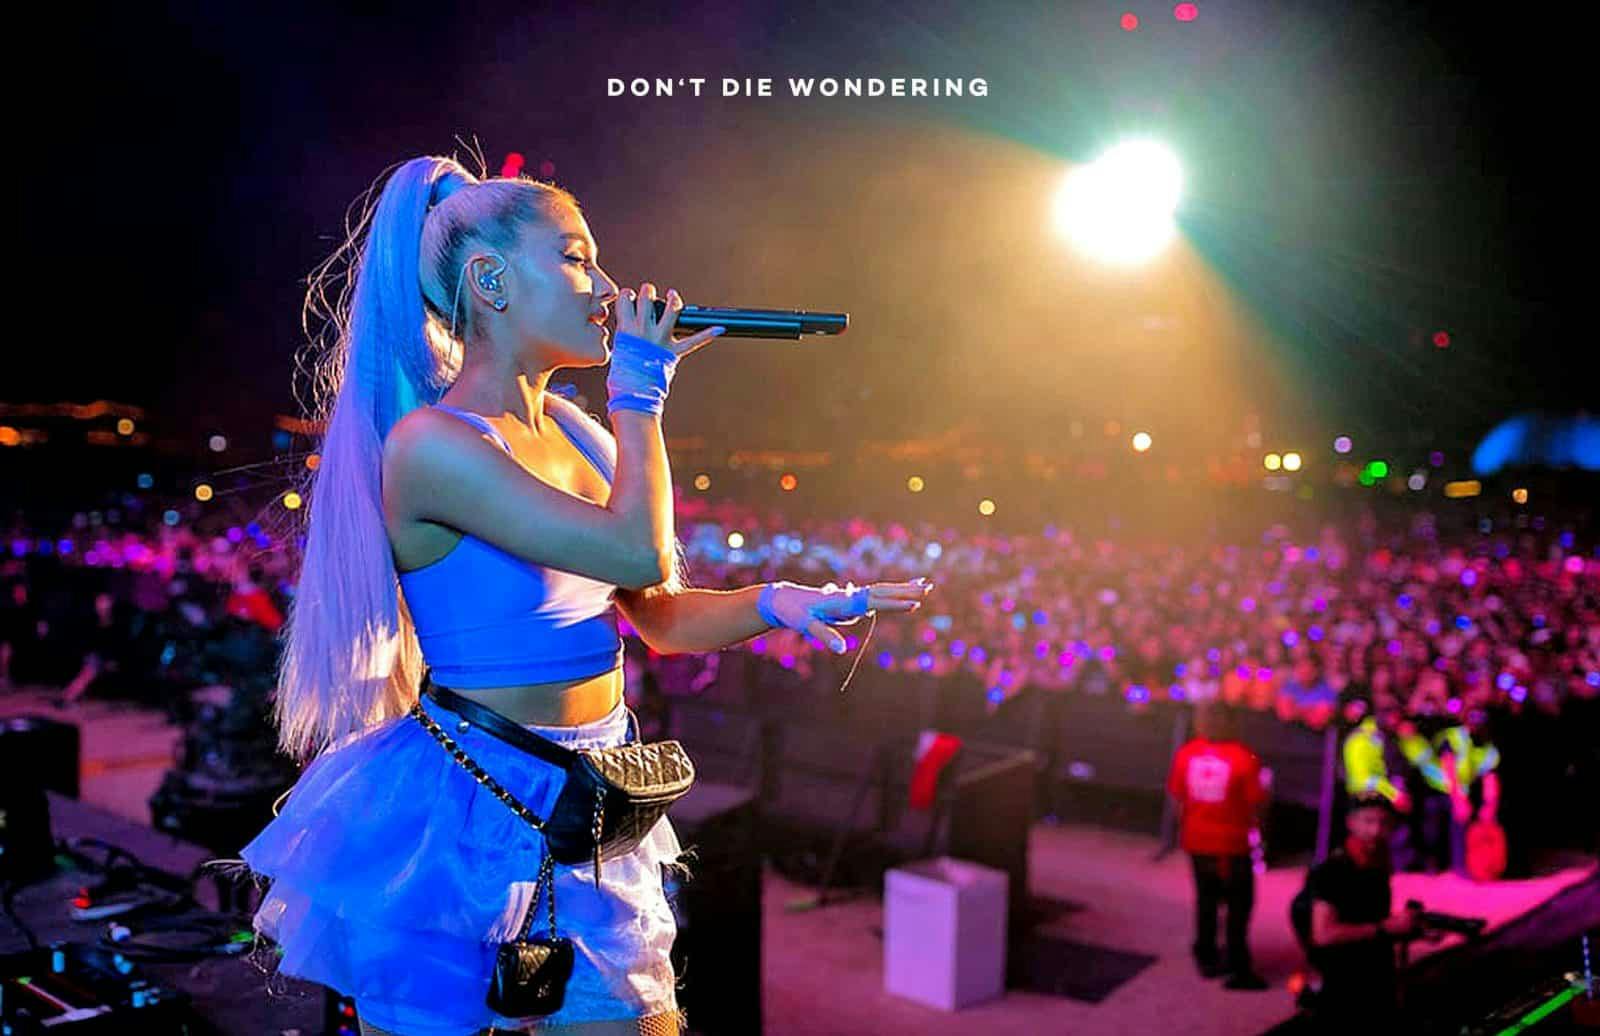 Ariana Grande: “I’m A Person Who’s Been Through A Lot And Doesn’t Know What To Say About It.”